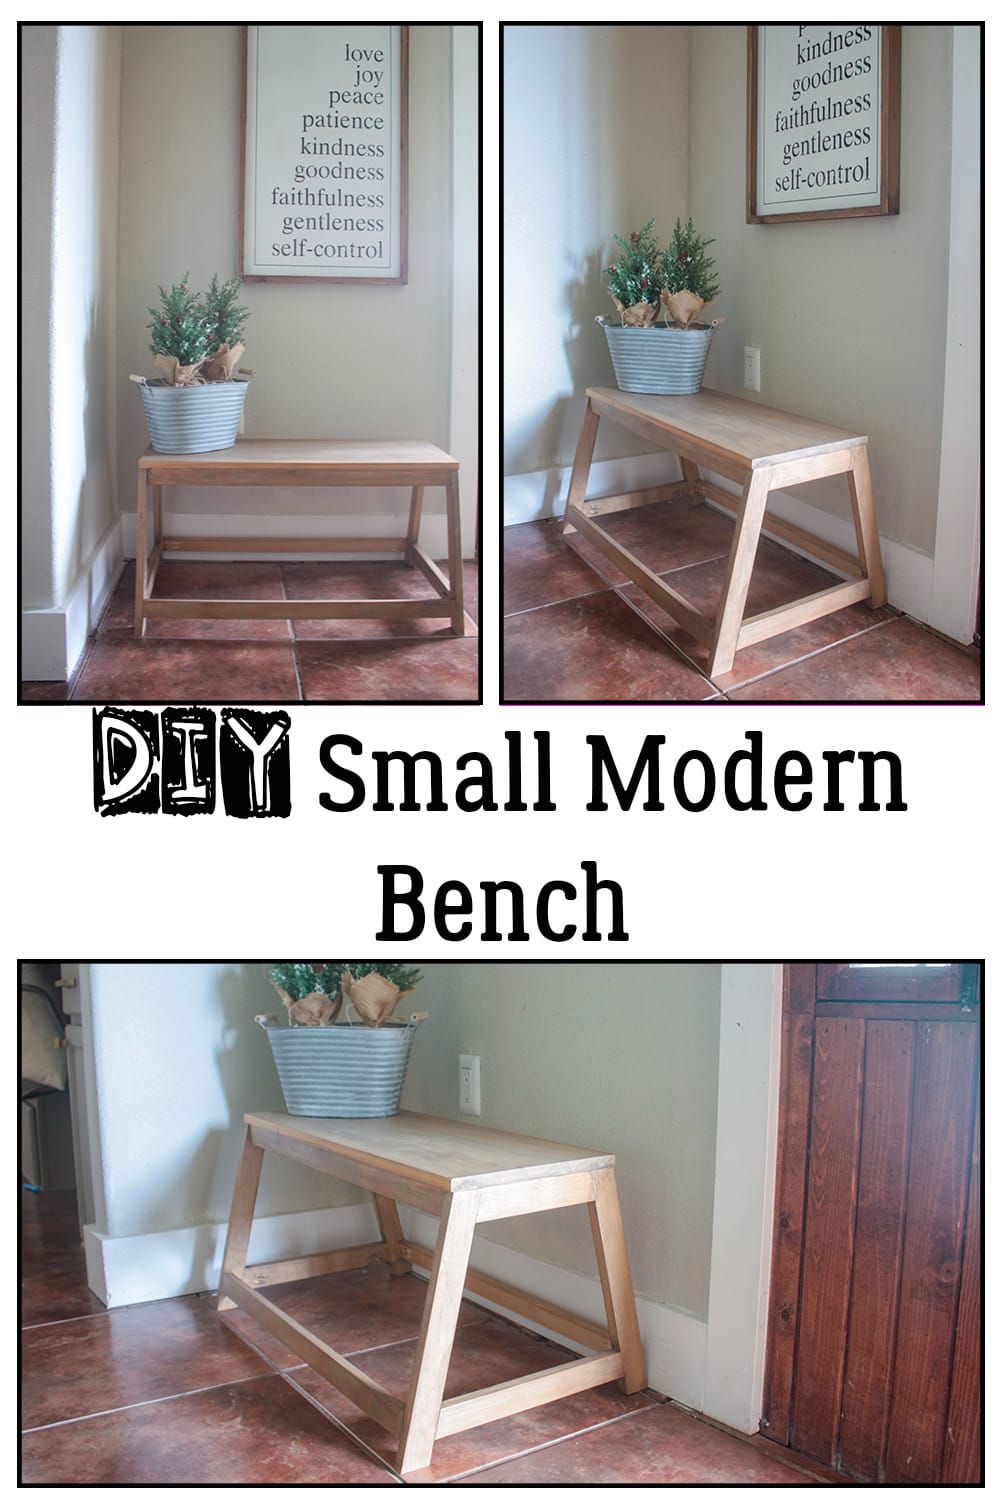 Collage of pictures of the DIY Small modern bench from different angles